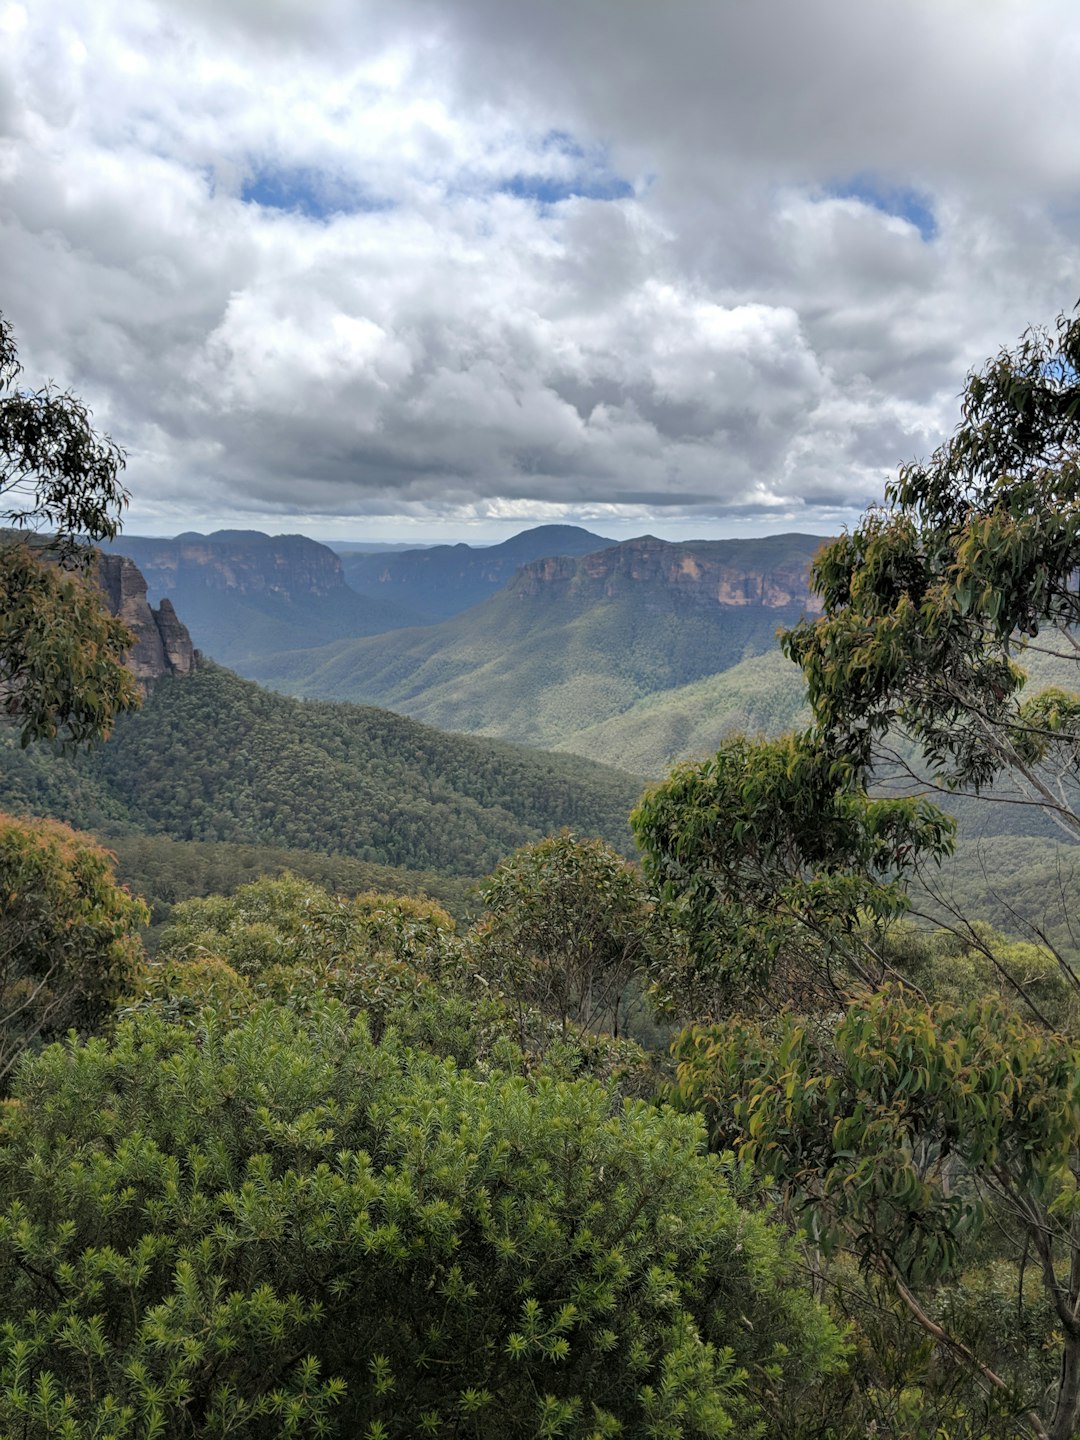 Nature reserve photo spot Blue Mountains NSW